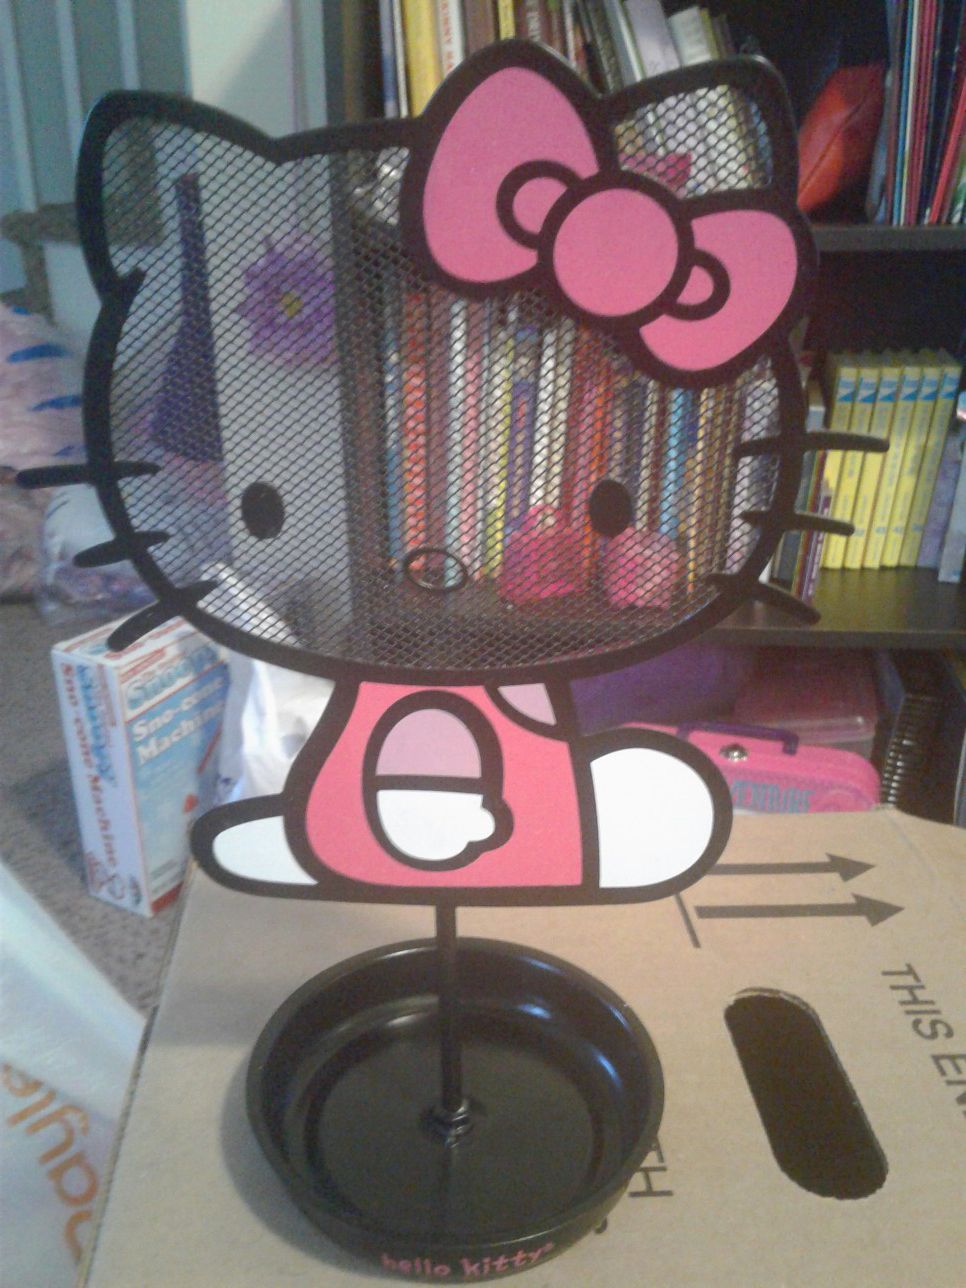 Hello Kitty jewelry holder, collectible tin & books.